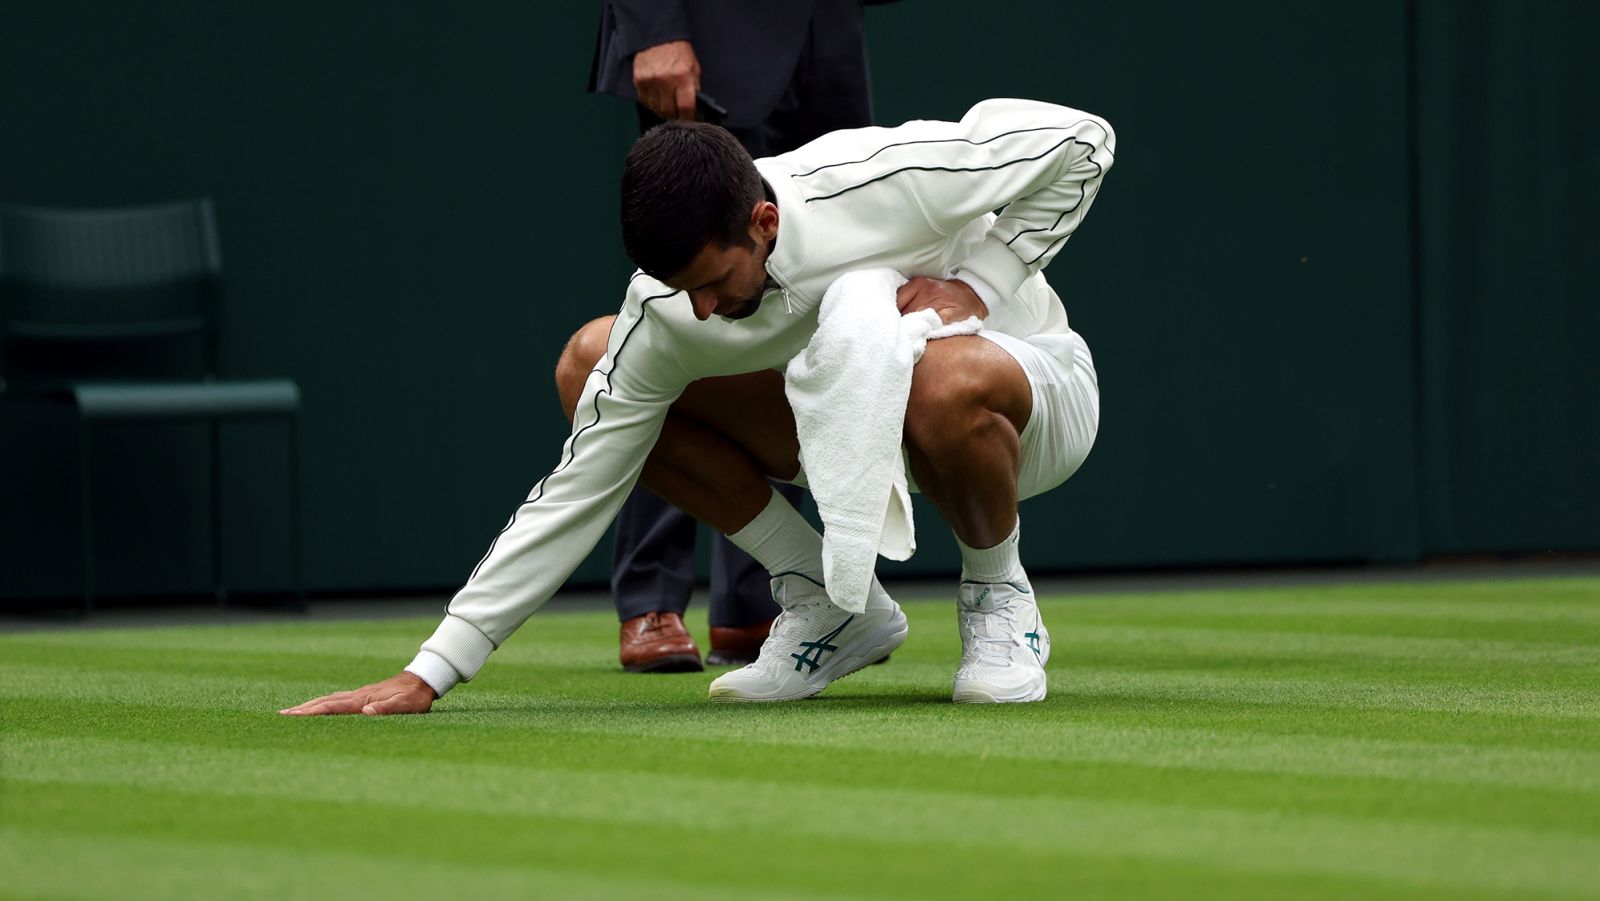 Novak Djokovic tends to the grass on center court during his first round win against Pedro Cachín at Wimbledon.  (Neil Hall/EPA-EFE/Shutterstock)